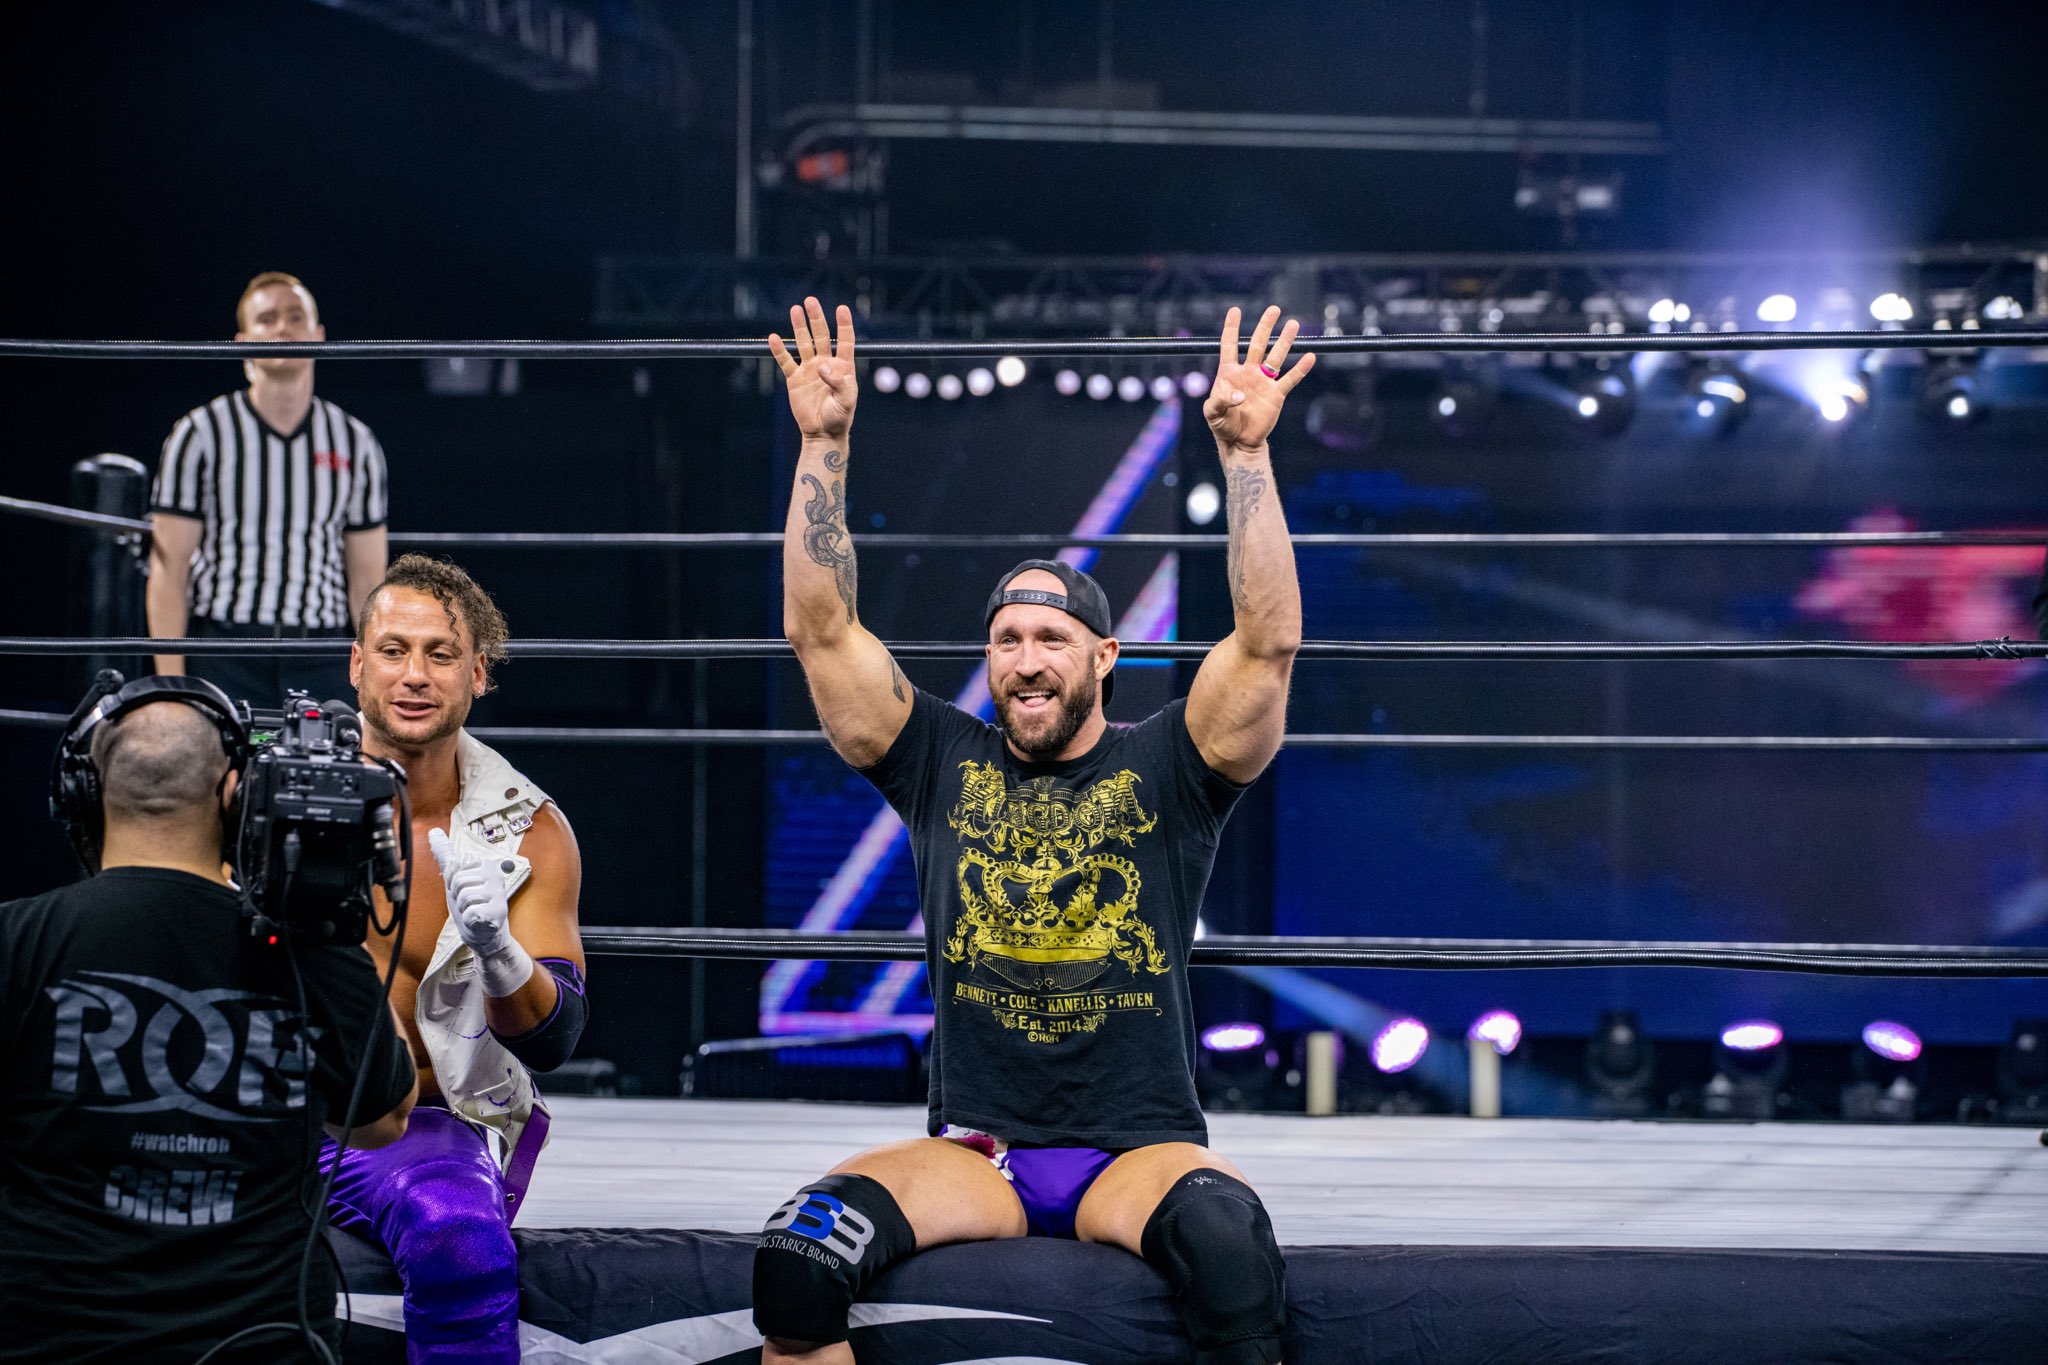 The OGK Reflect On Their Bittersweet Tag Title Win at Honor For All and Future of ROH